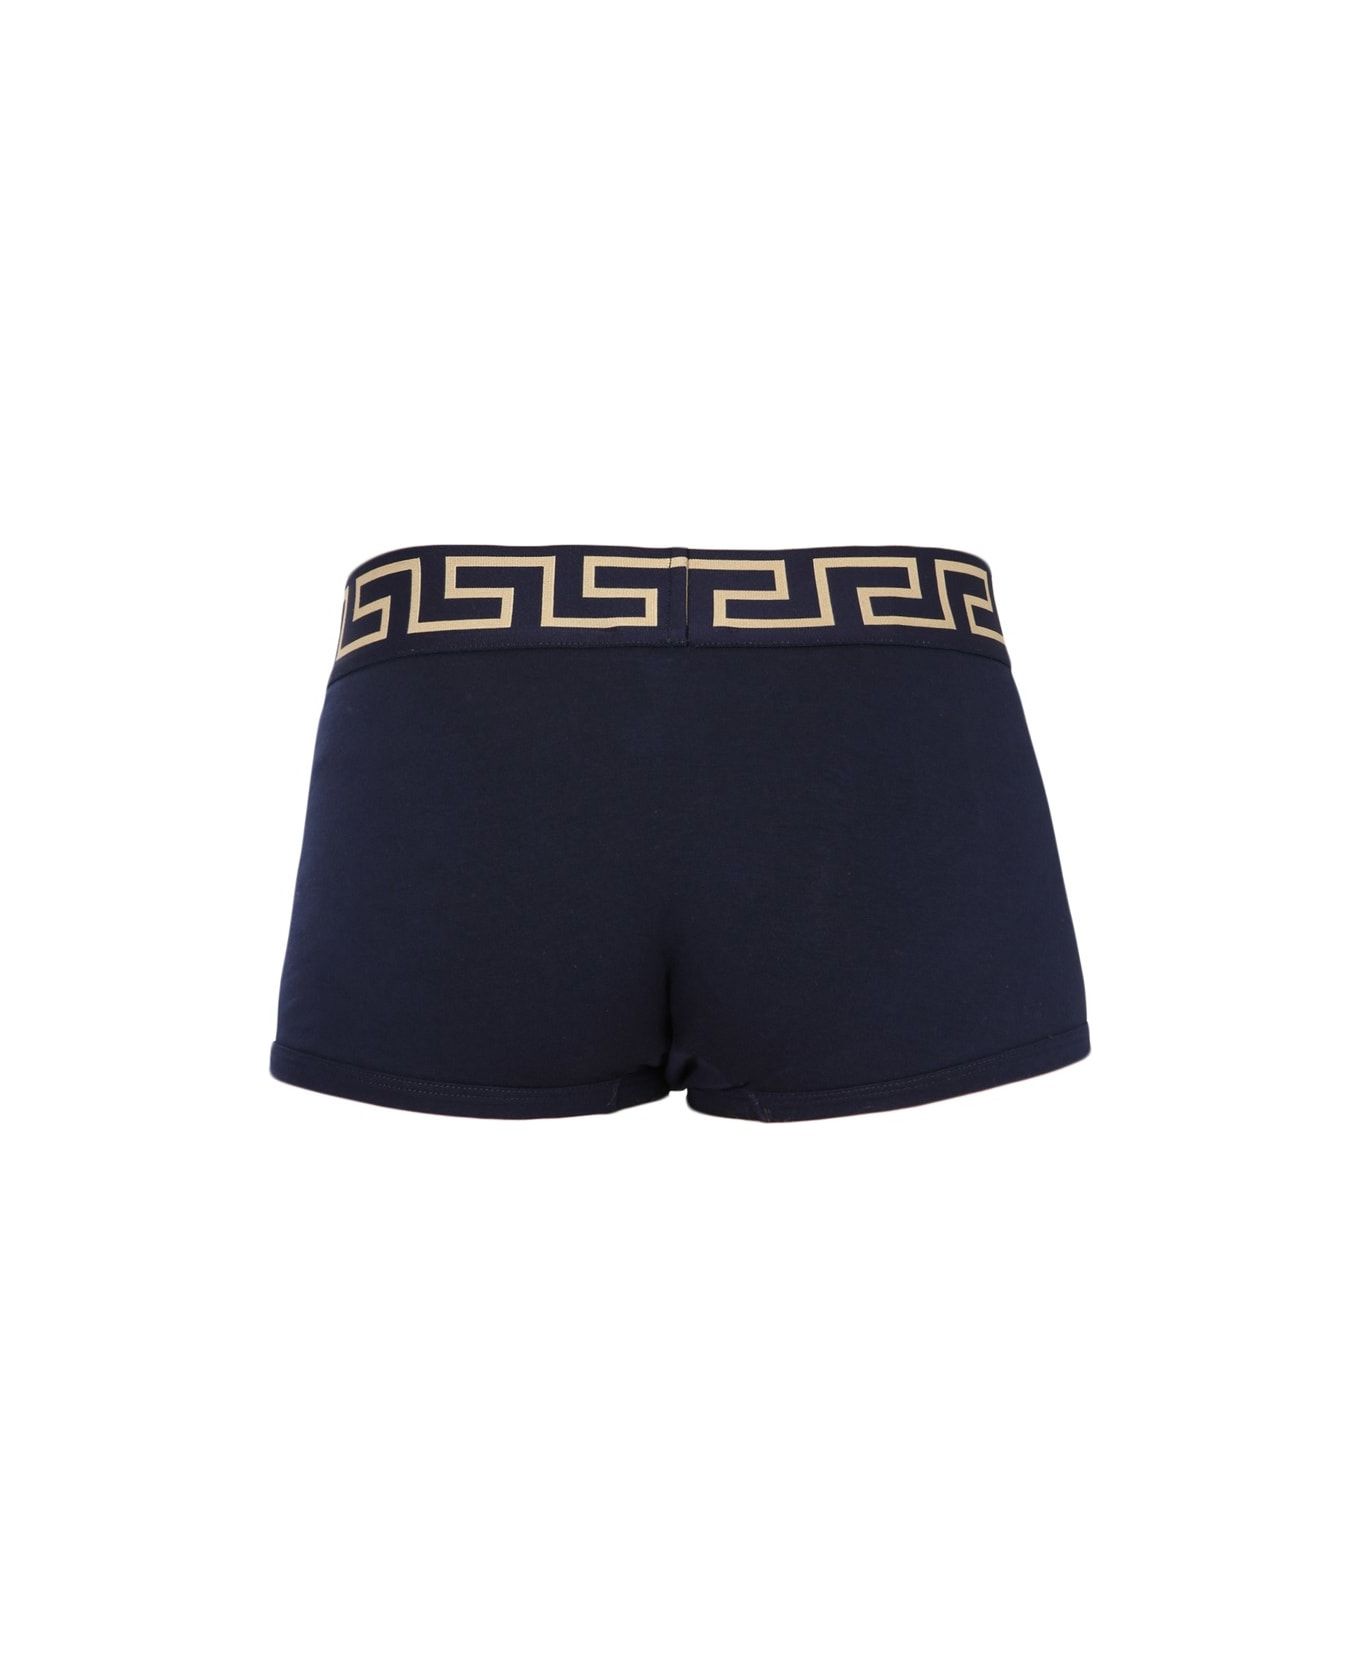 Versace Boxer With Greek - Blue